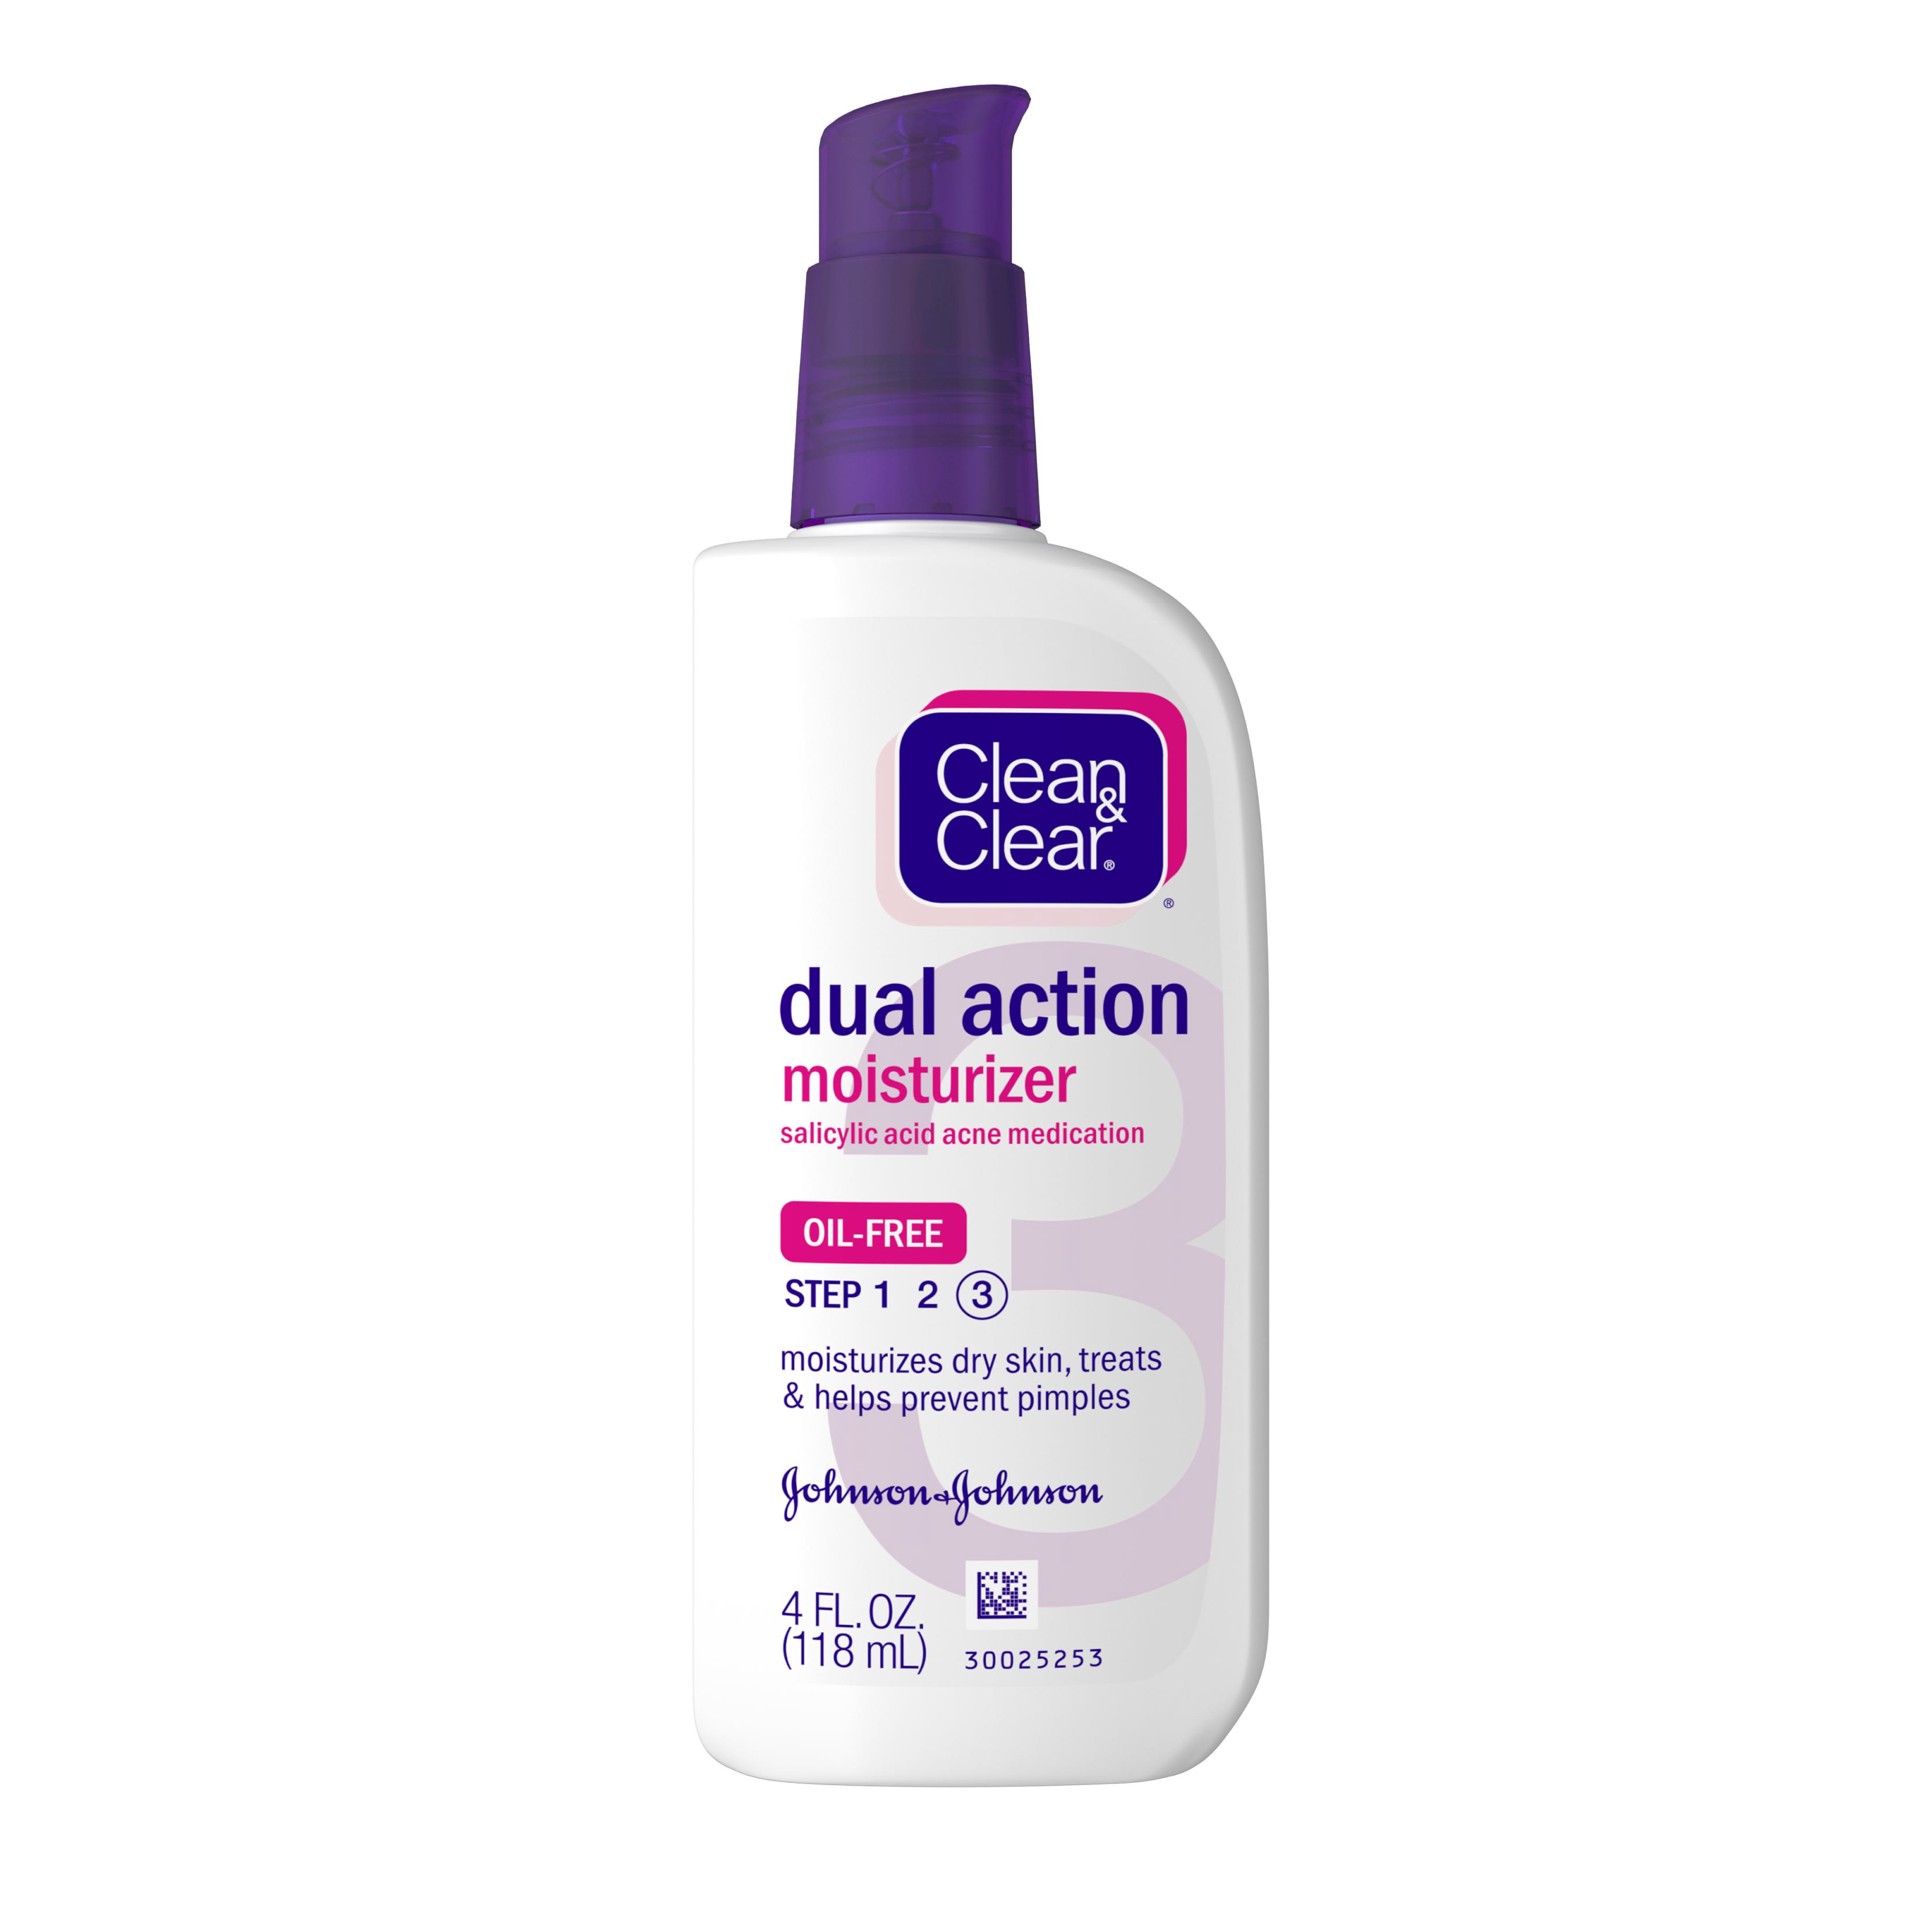 slide 1 of 1, Clean & Clear Essentials Dual Action Facial Moisturizer, 0.5% Salicylic Acid Acne Medication to Moisturize Dry Skin, Treat Acne & Help Prevent Pimples, Oil Free for Acne-Prone Skin, 4 fl oz